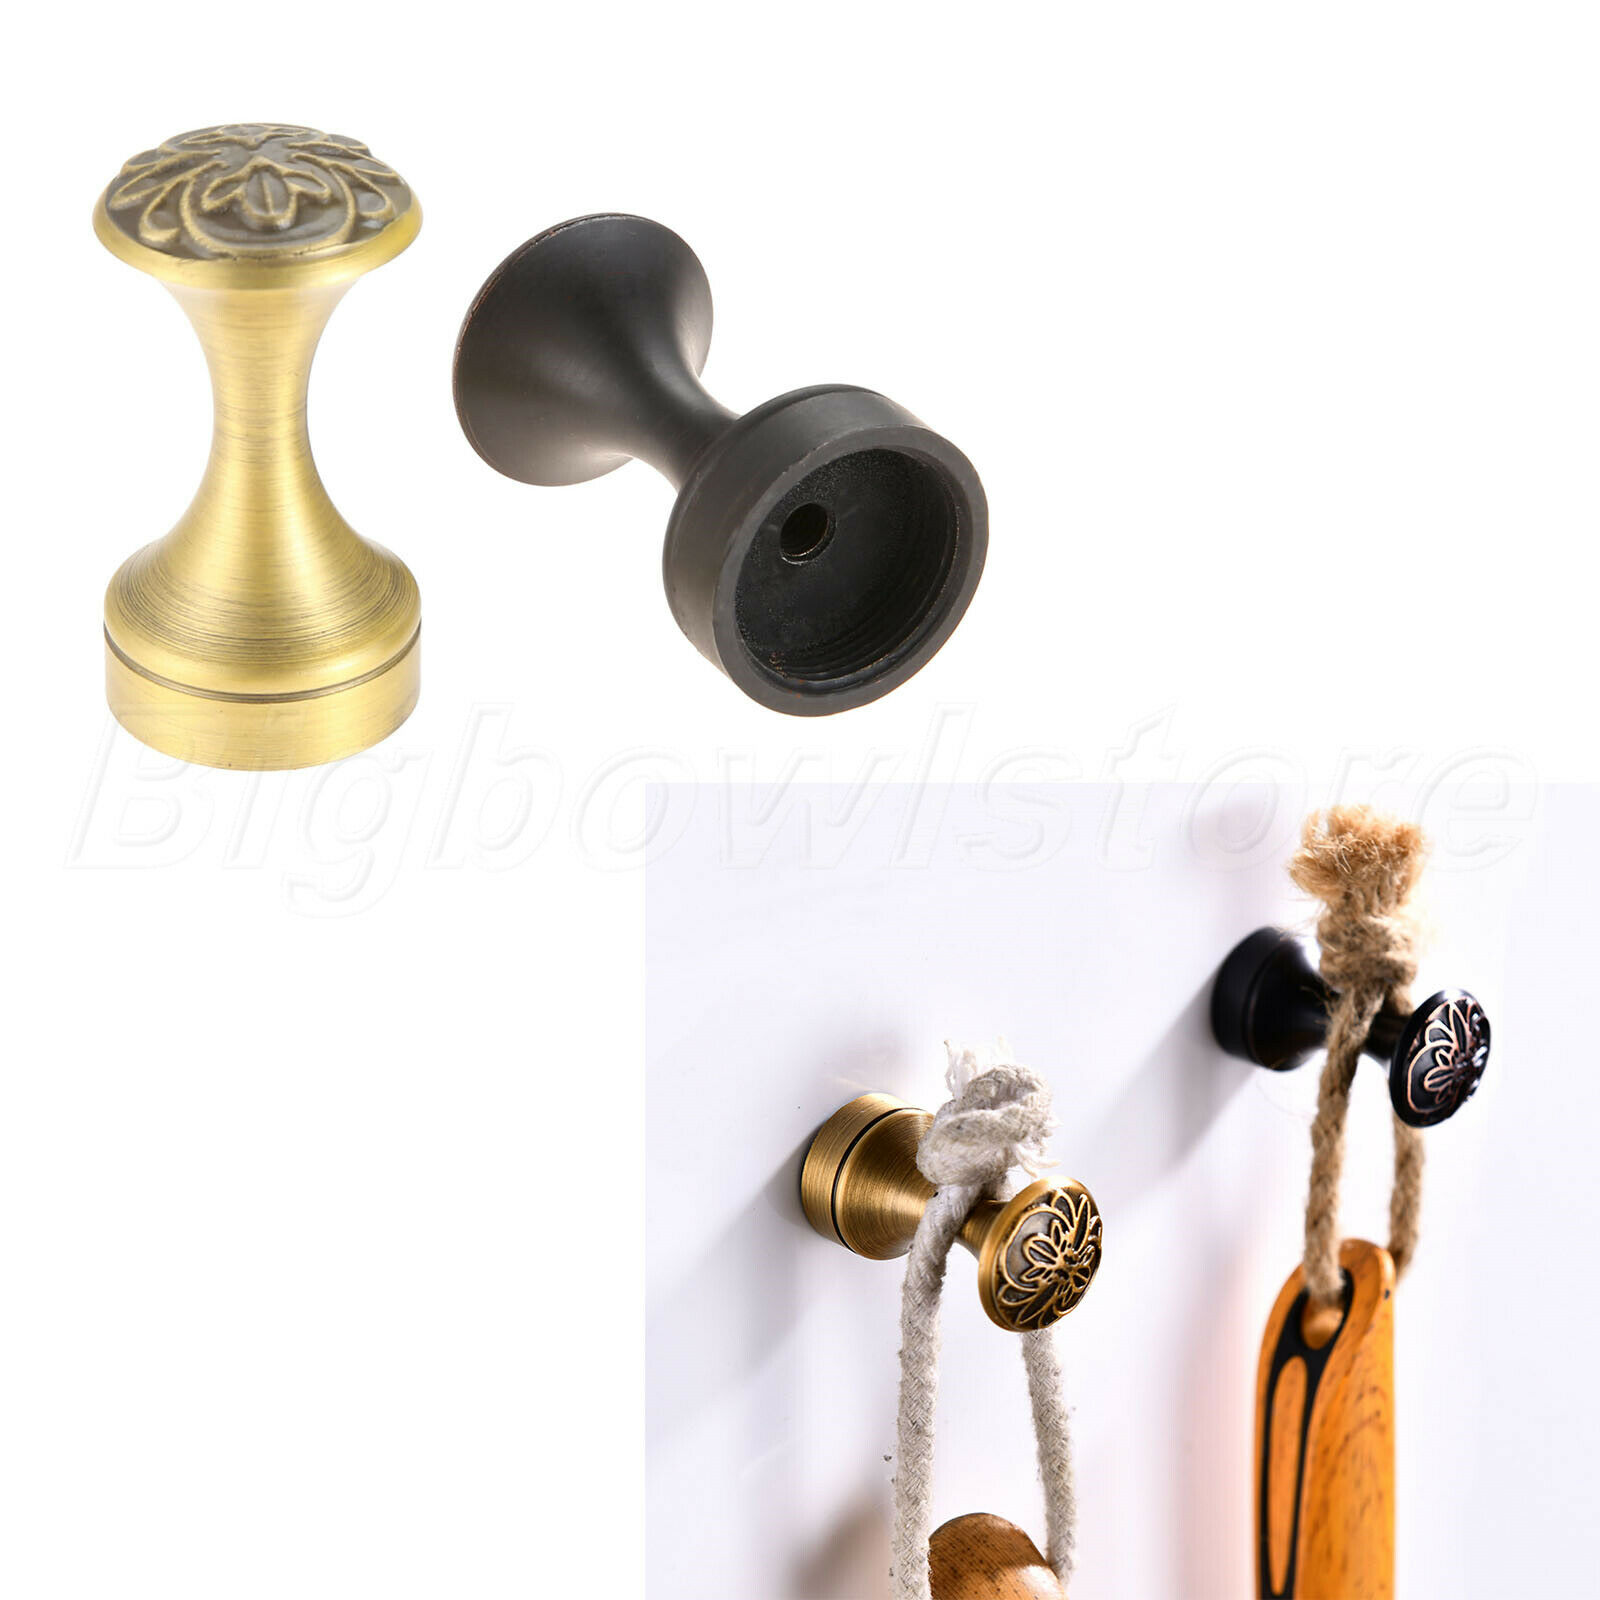 1pc Antiqued Wall Mounted Robe Hook Towel Hook Bedrooms Bathrooms Closets Parts